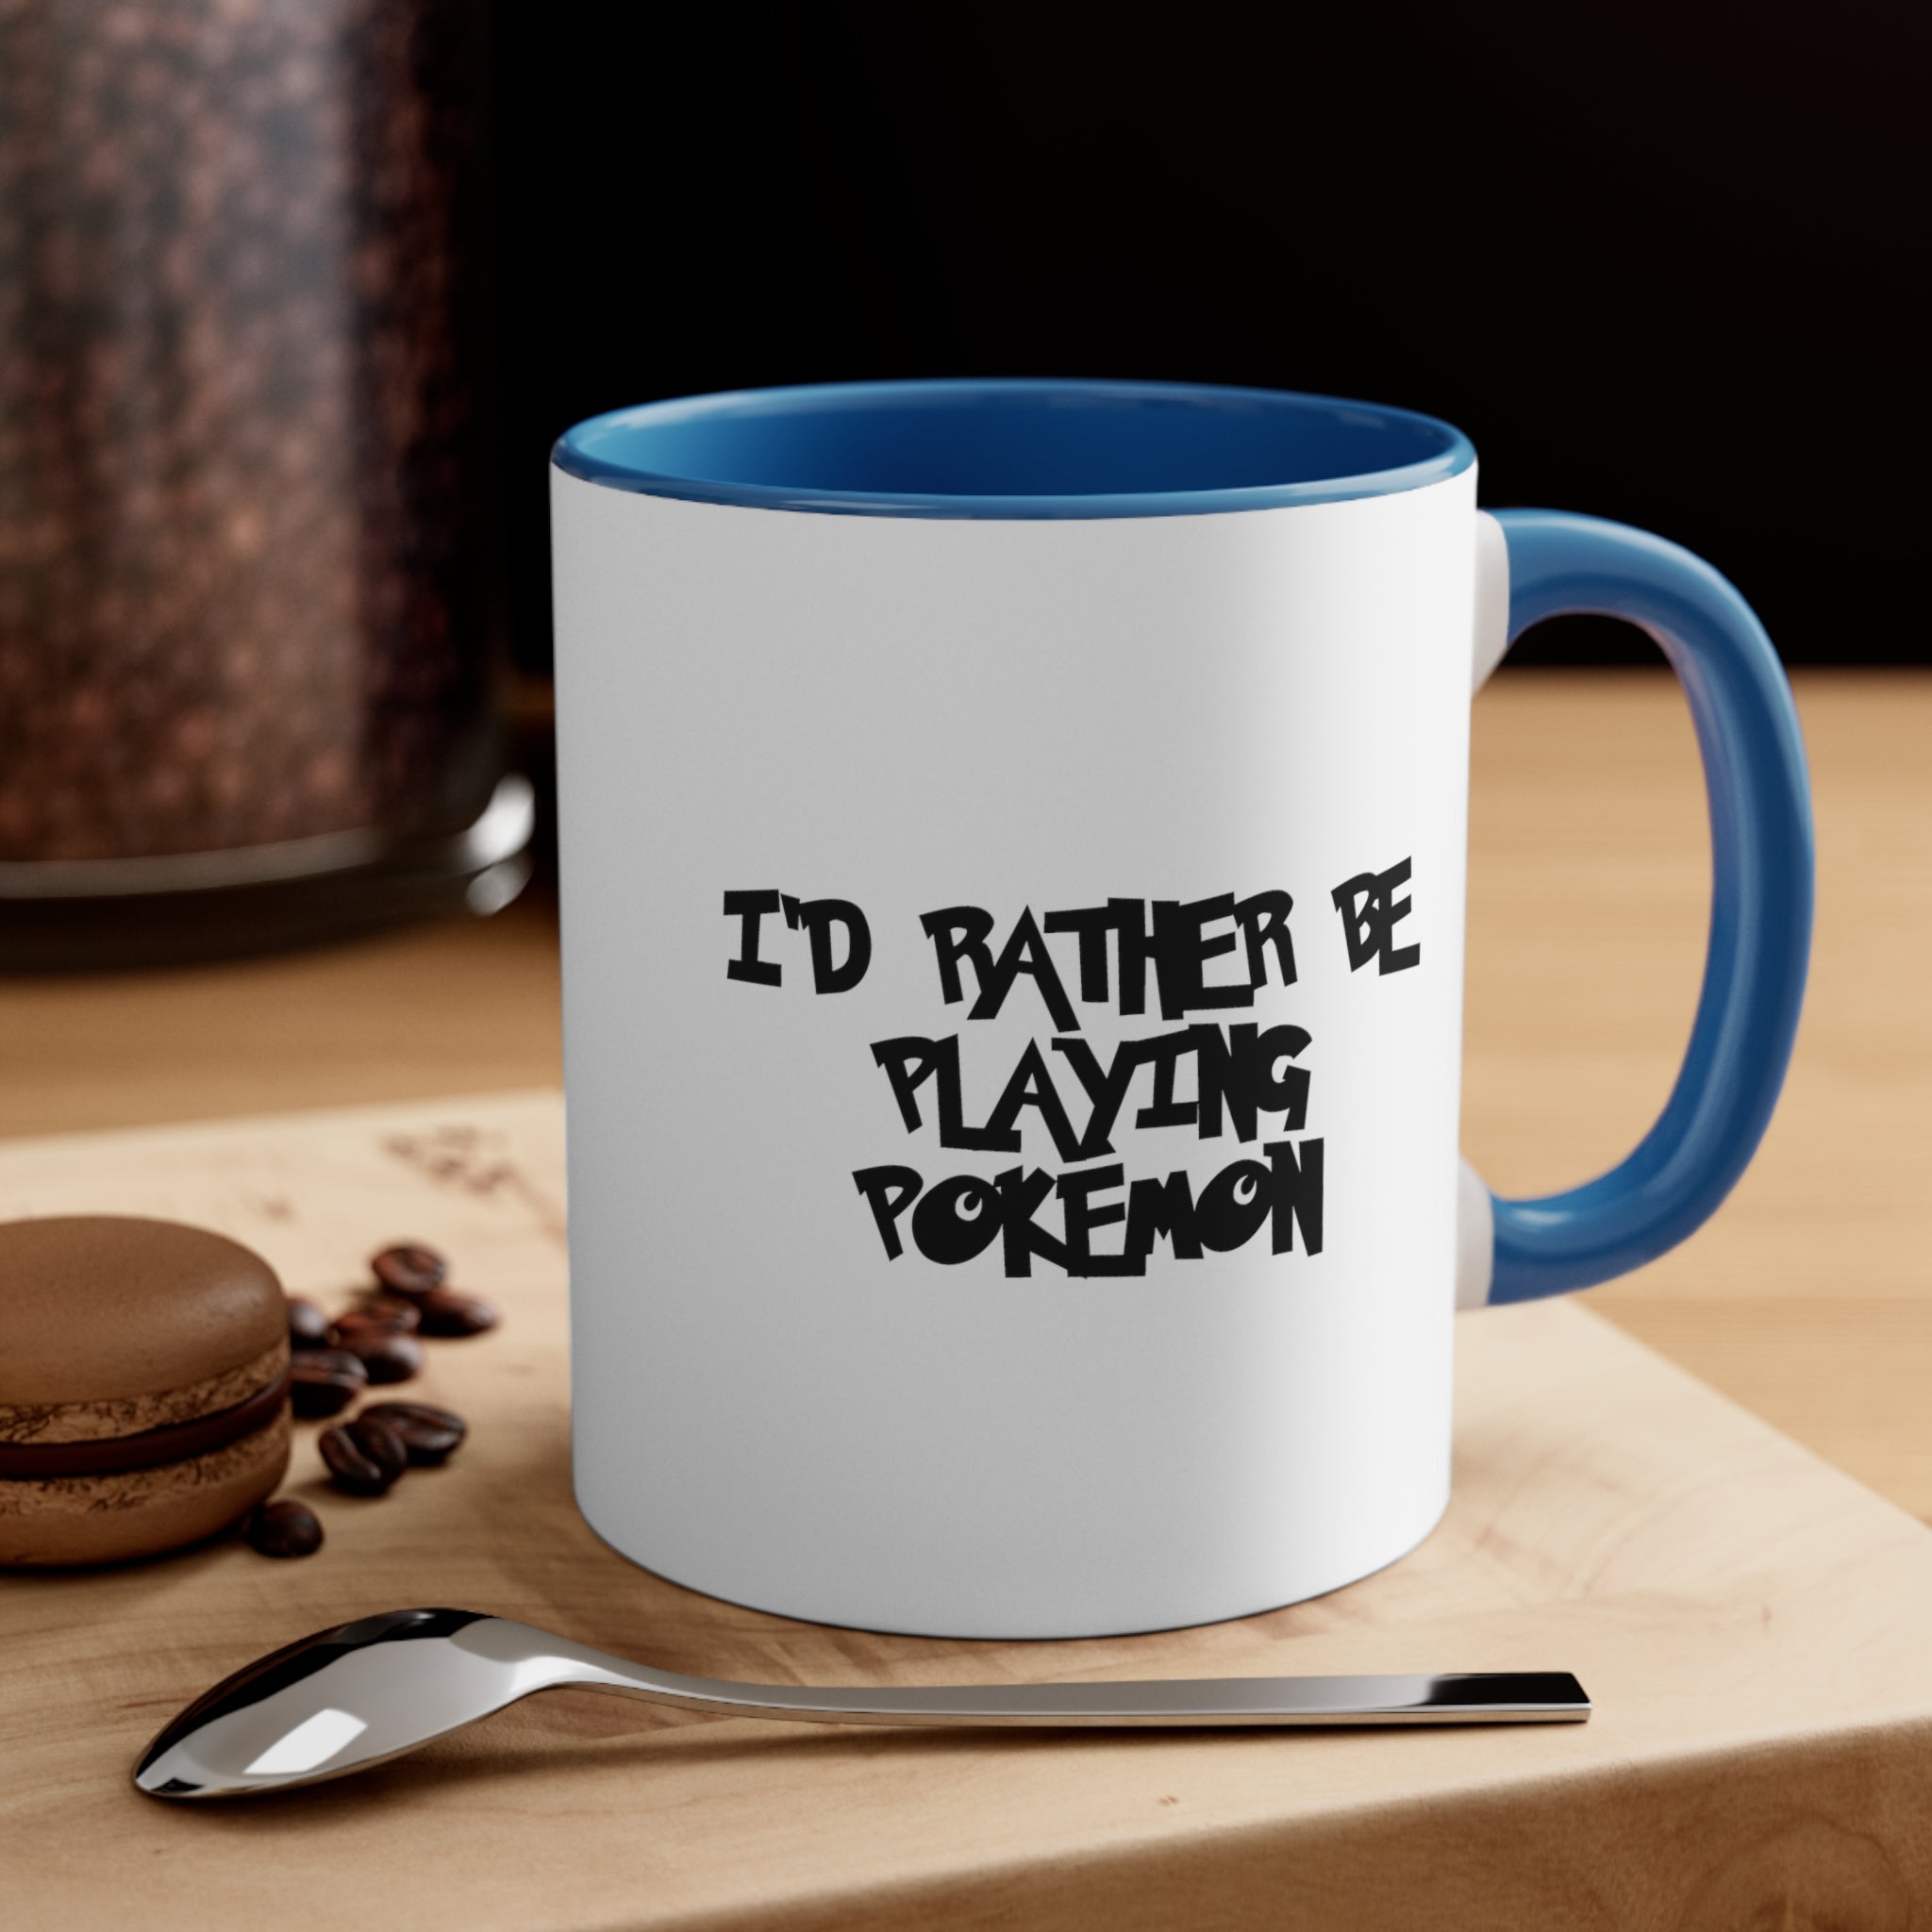 Poke mon I'd Rather Be Playing Coffee Mug, 11oz Shirt Tshirt T-shirt Gamer Gift For Him Her Game Cup Cups Mugs Birthday Christmas Valentine's Anniversary Gifts